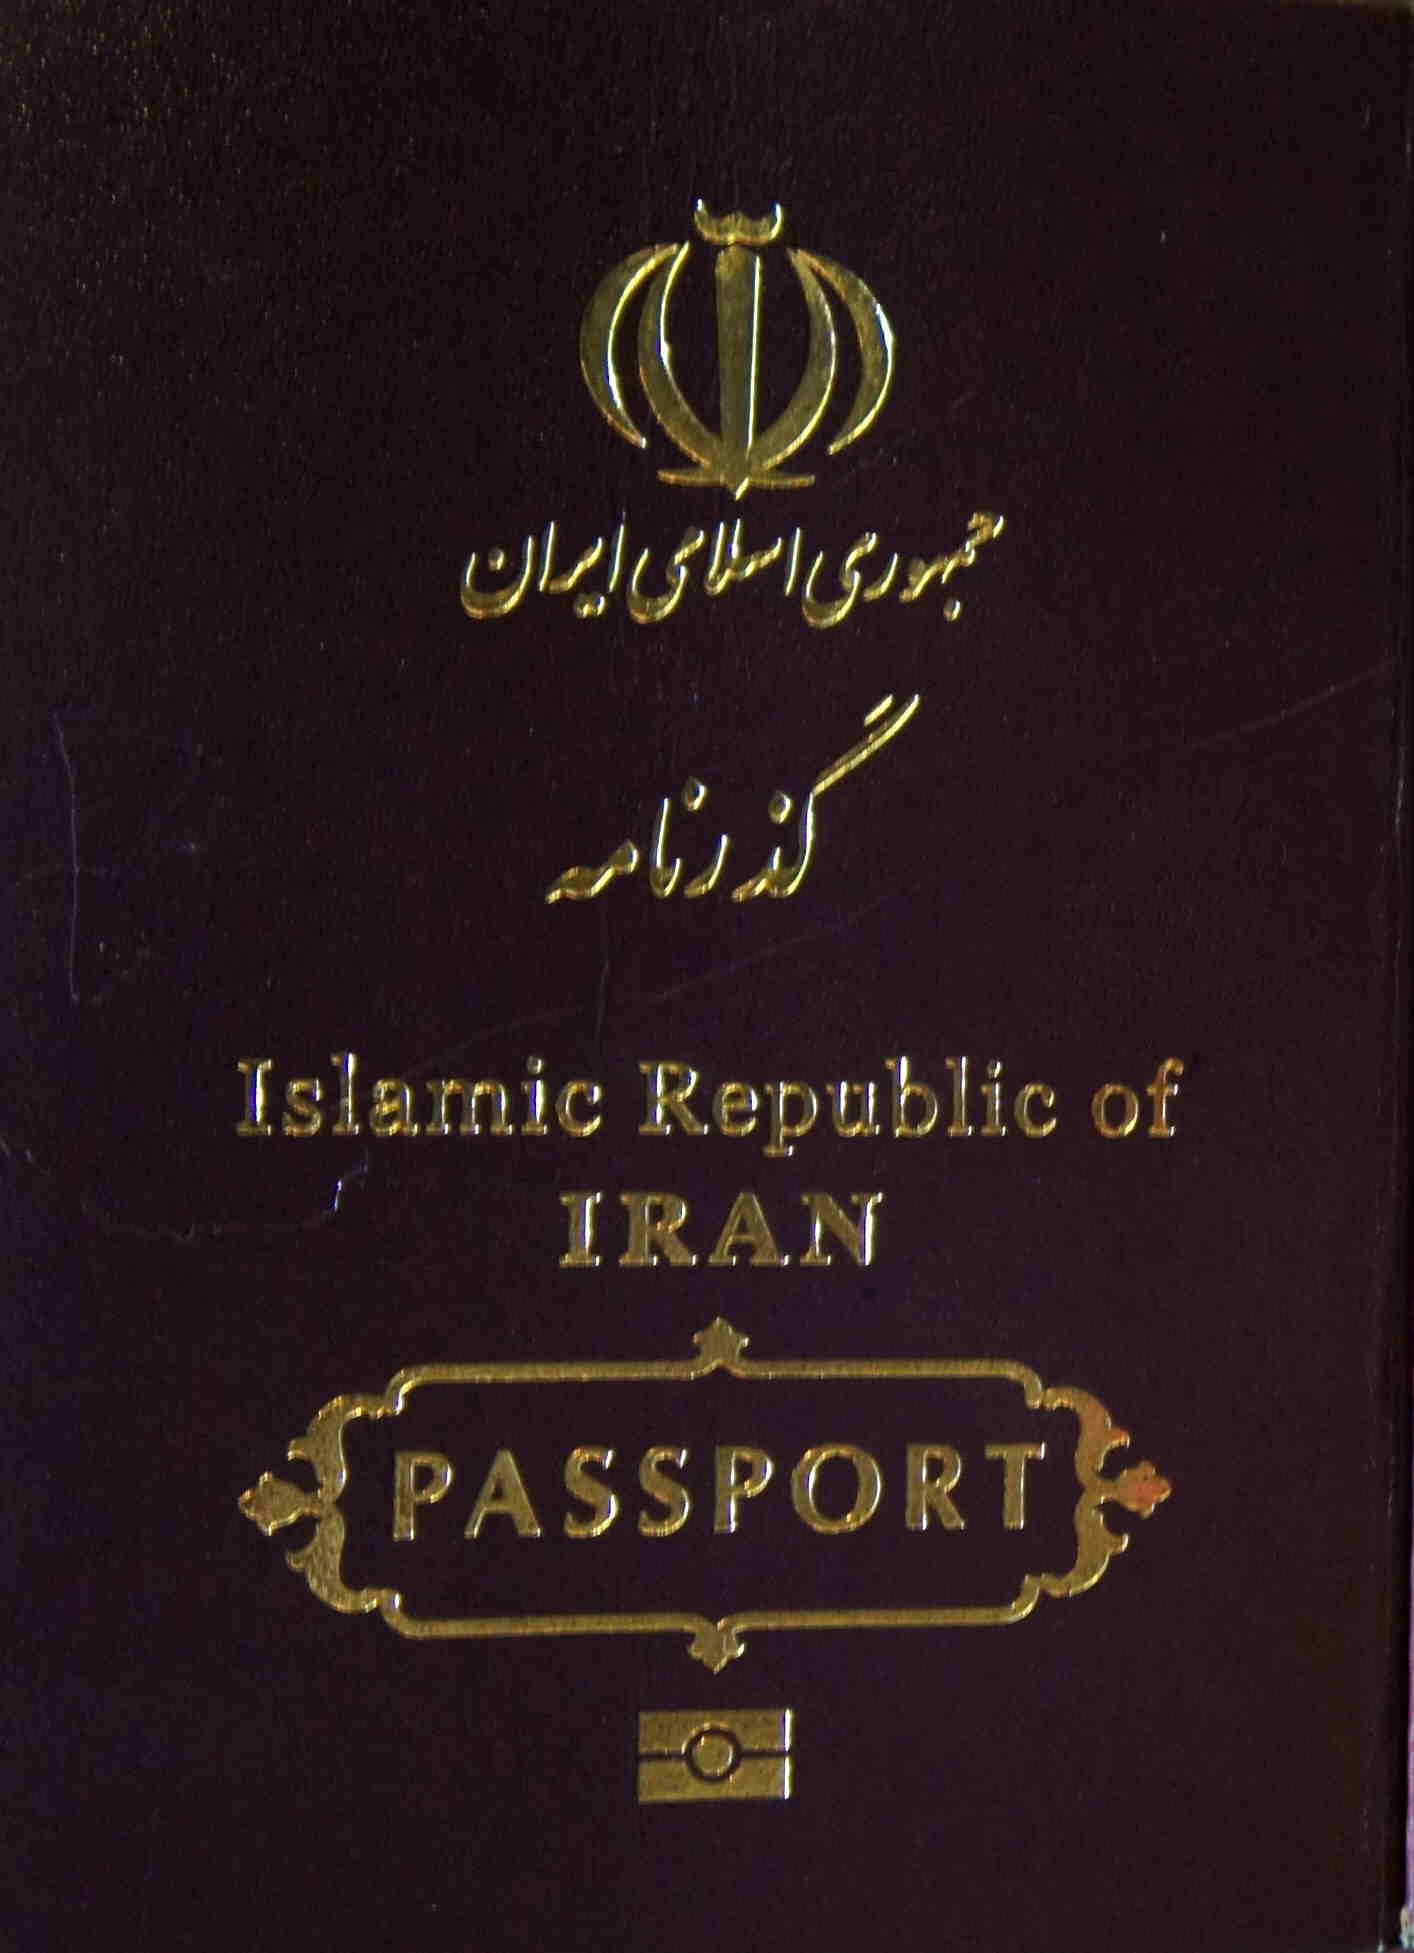 We can help you get immigration to Iran passports.io